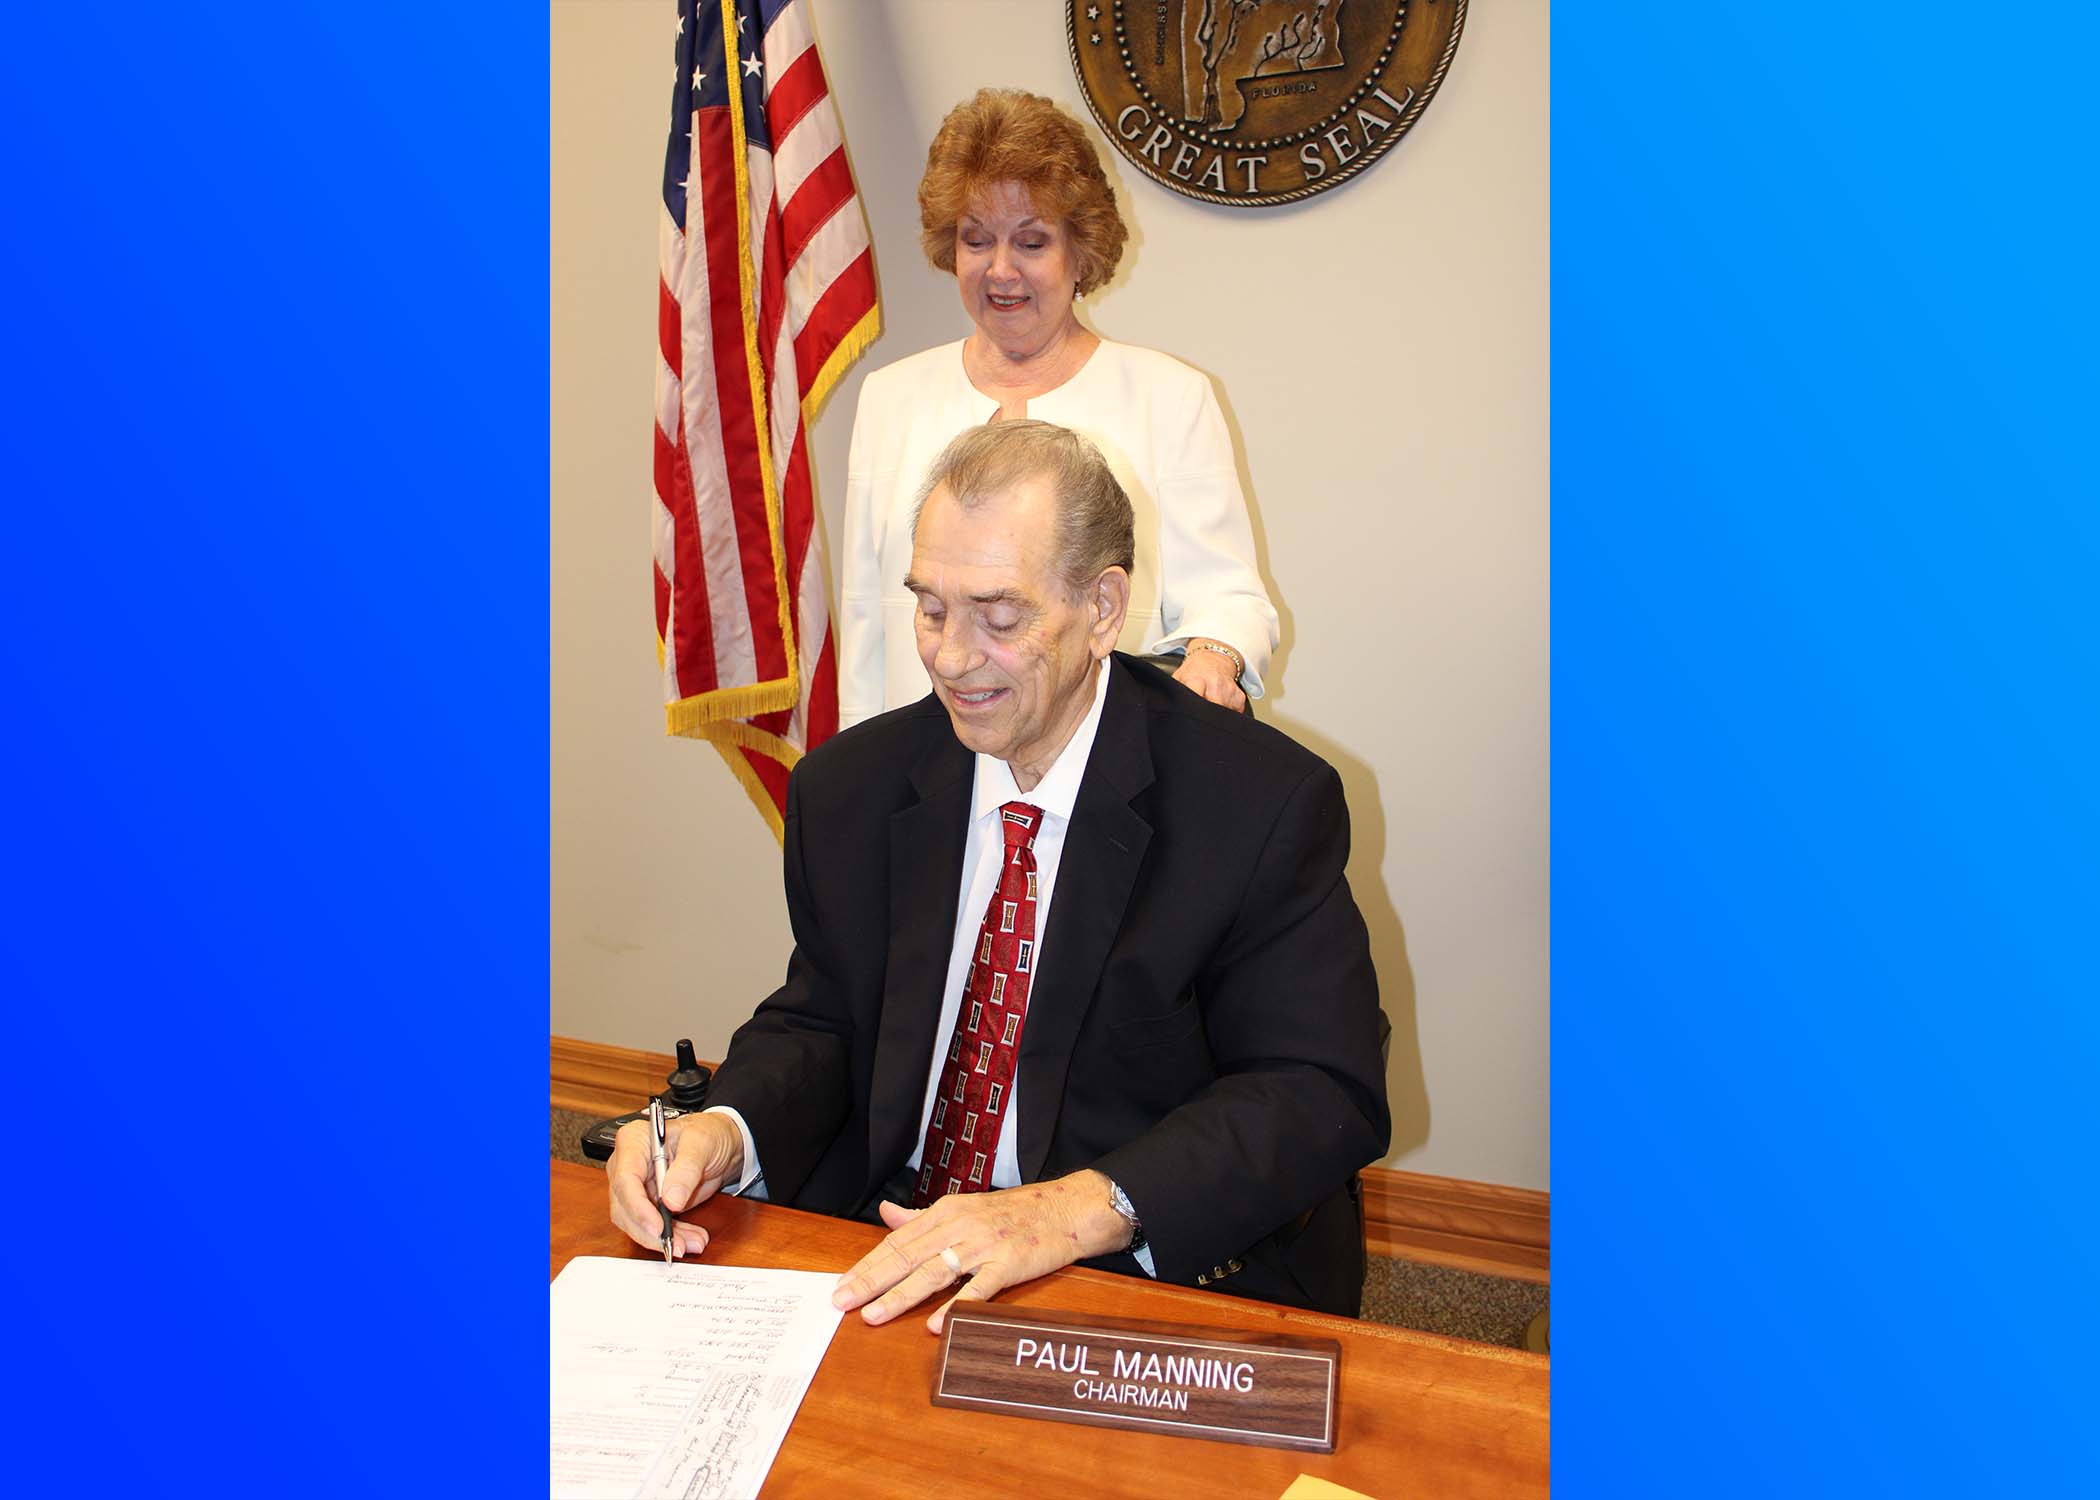 St. Clair County Commission Chairman seeks third consecutive term